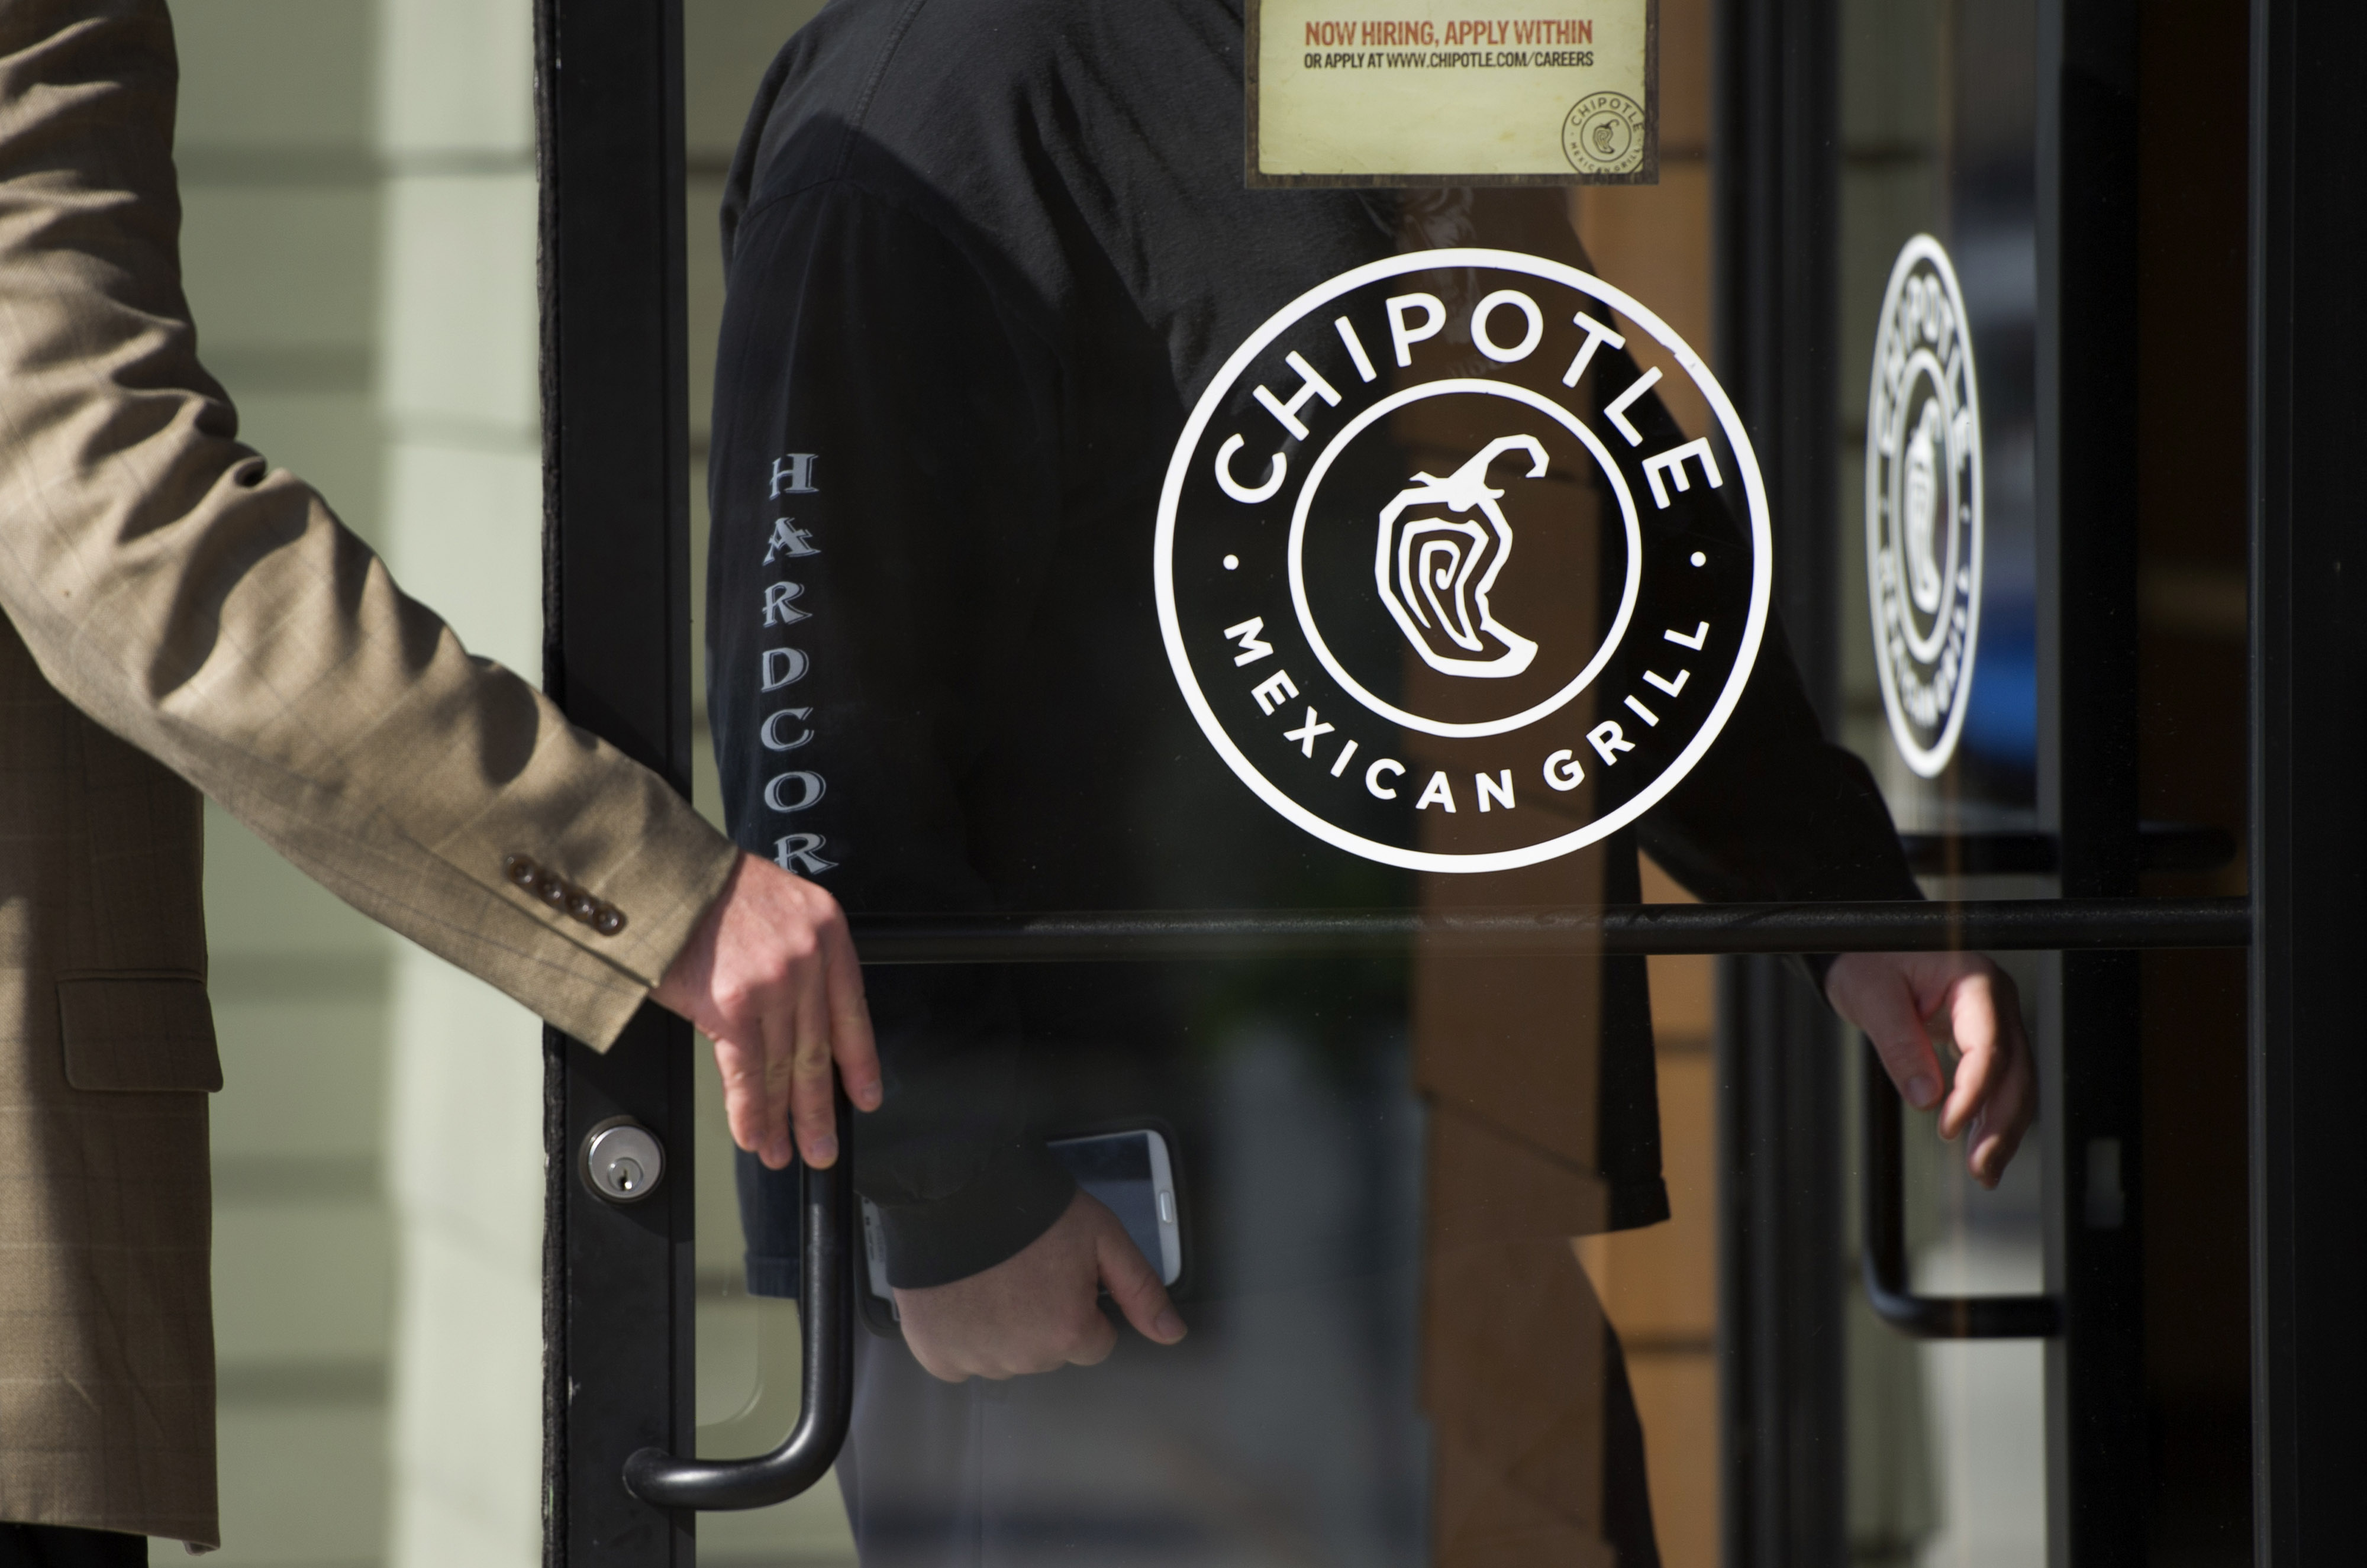 Pedestrians enter a Chipotle Mexican Grill in Martinez, California on Feb. 2, 2015. (David Paul Morris—Getty Images/© 2015 Bloomberg Finance LP)